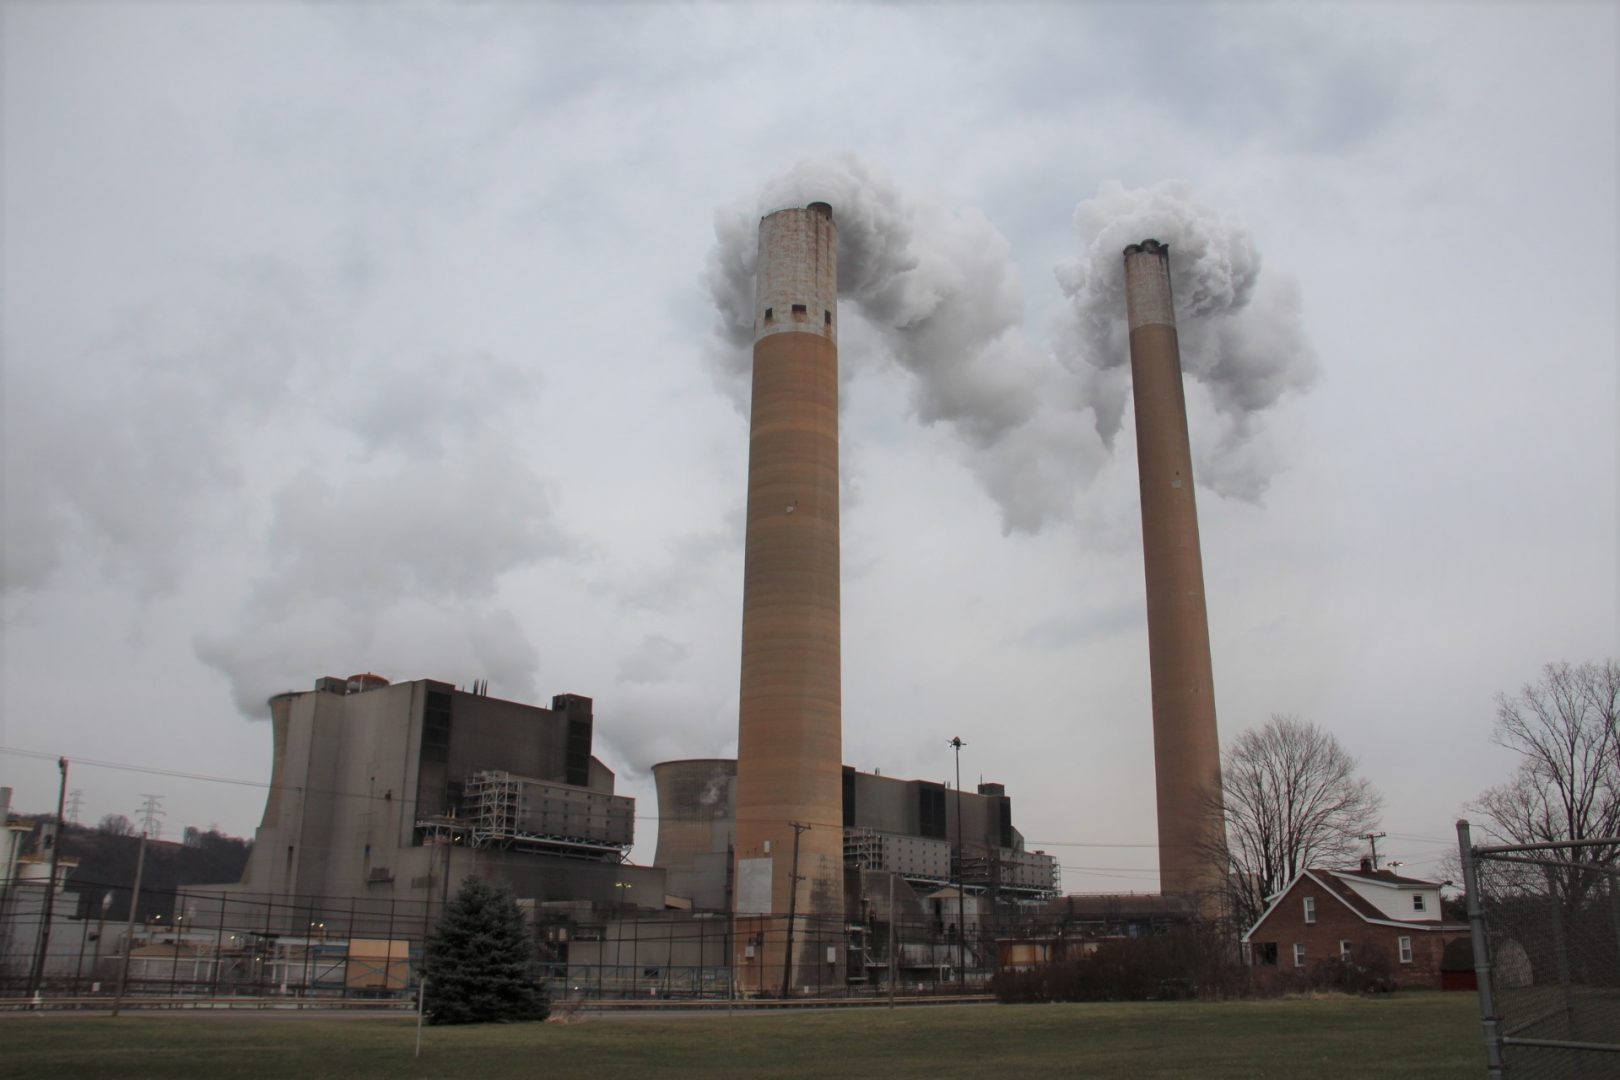 Bruce Mansfield coal-fired power plant in Shippingport, Pa., which was retired early in November 2019.